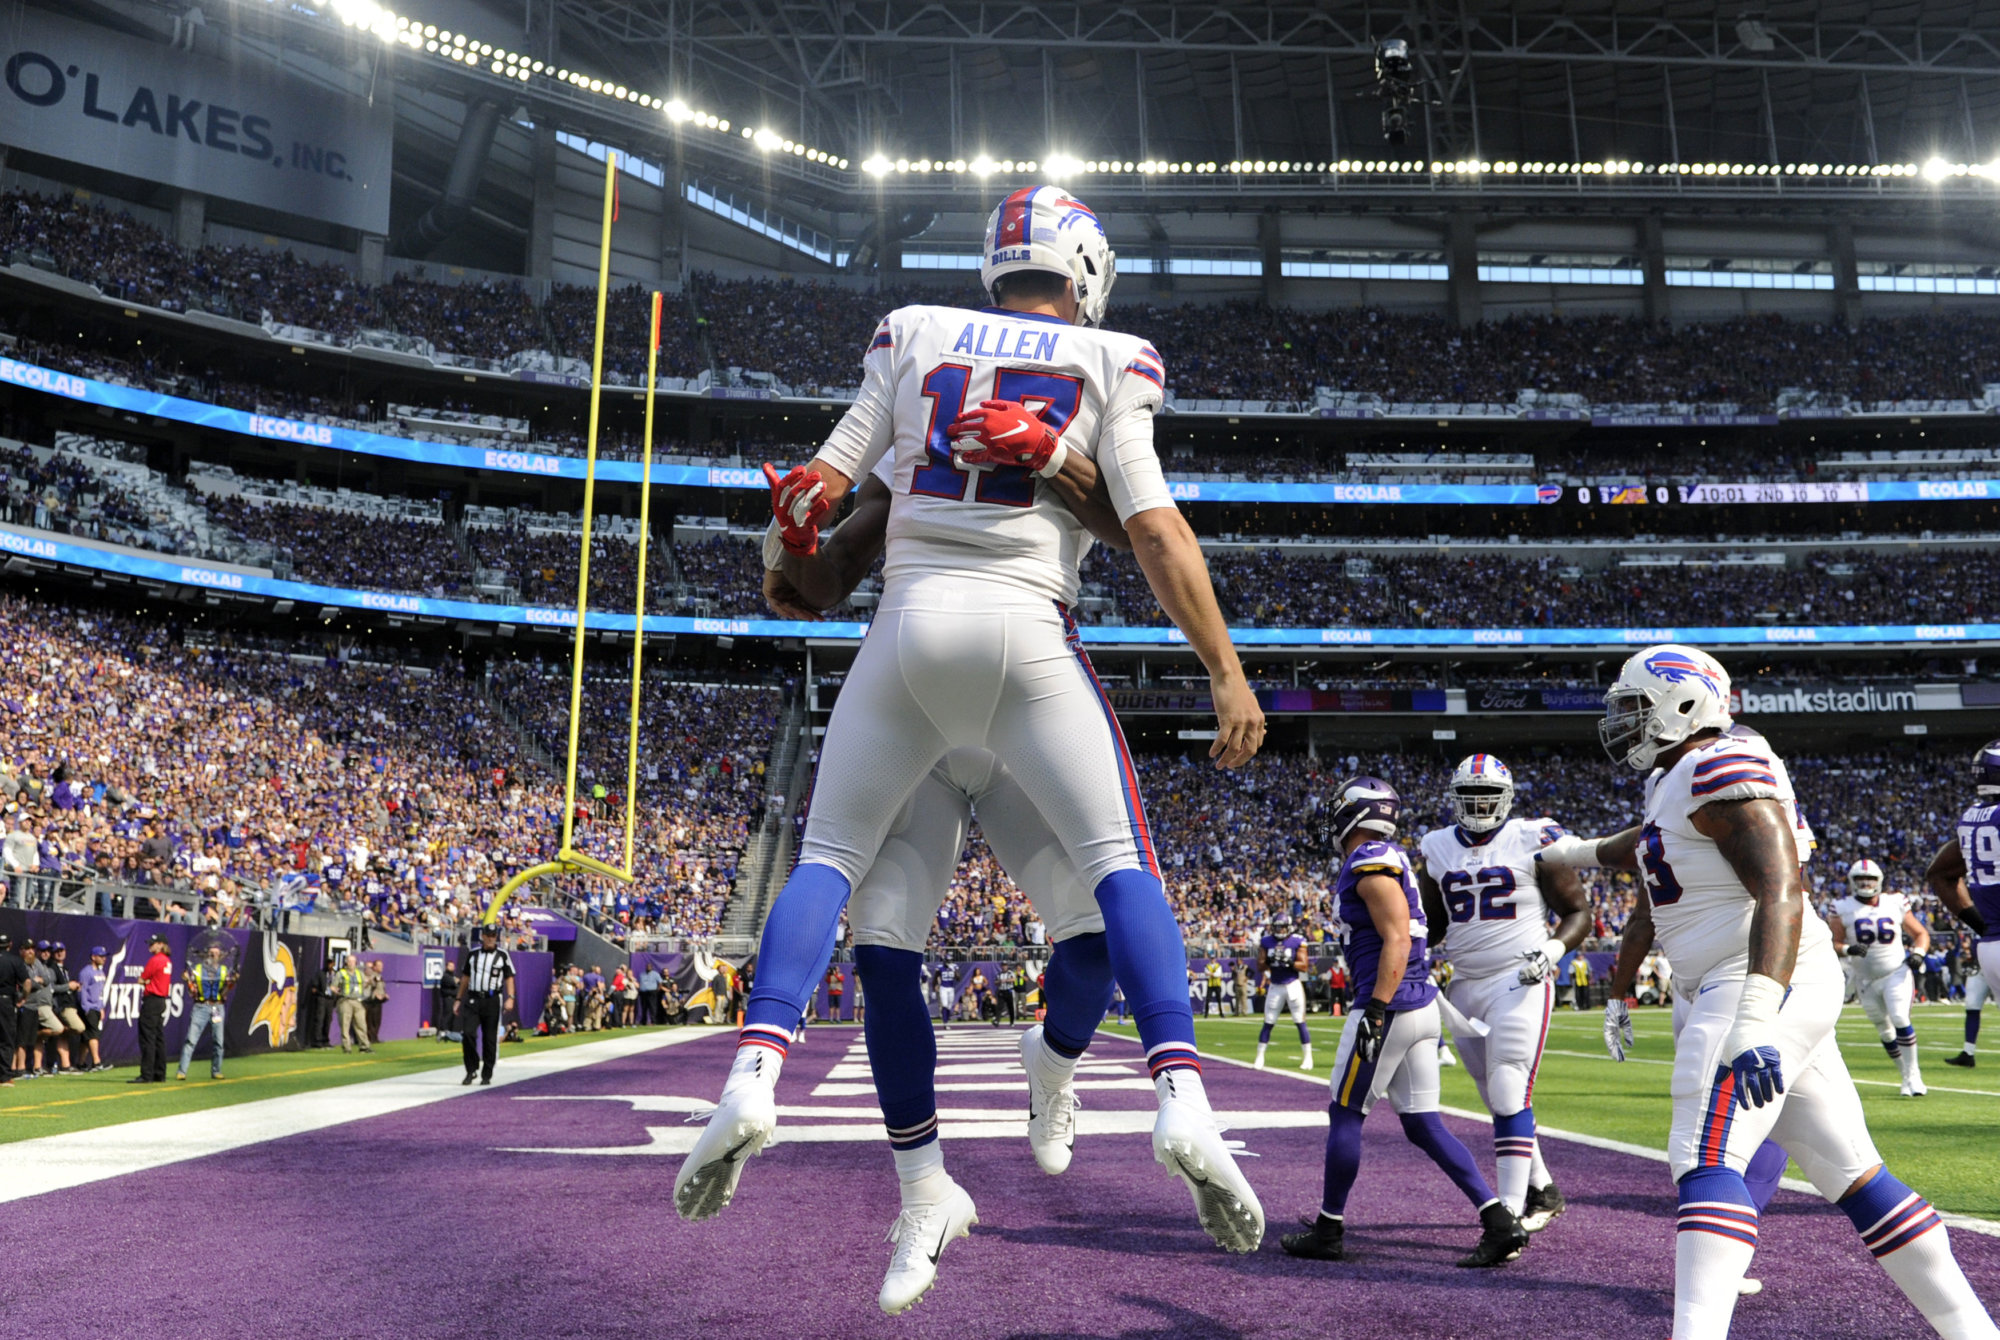 MINNEAPOLIS, MN - SEPTEMBER 23: Josh Allen #17 of the Buffalo Bills celebrates with teammates after scoring a touchdown in the first quarter of the game against the Minnesota Vikings at U.S. Bank Stadium on September 23, 2018 in Minneapolis, Minnesota. (Photo by Hannah Foslien/Getty Images)